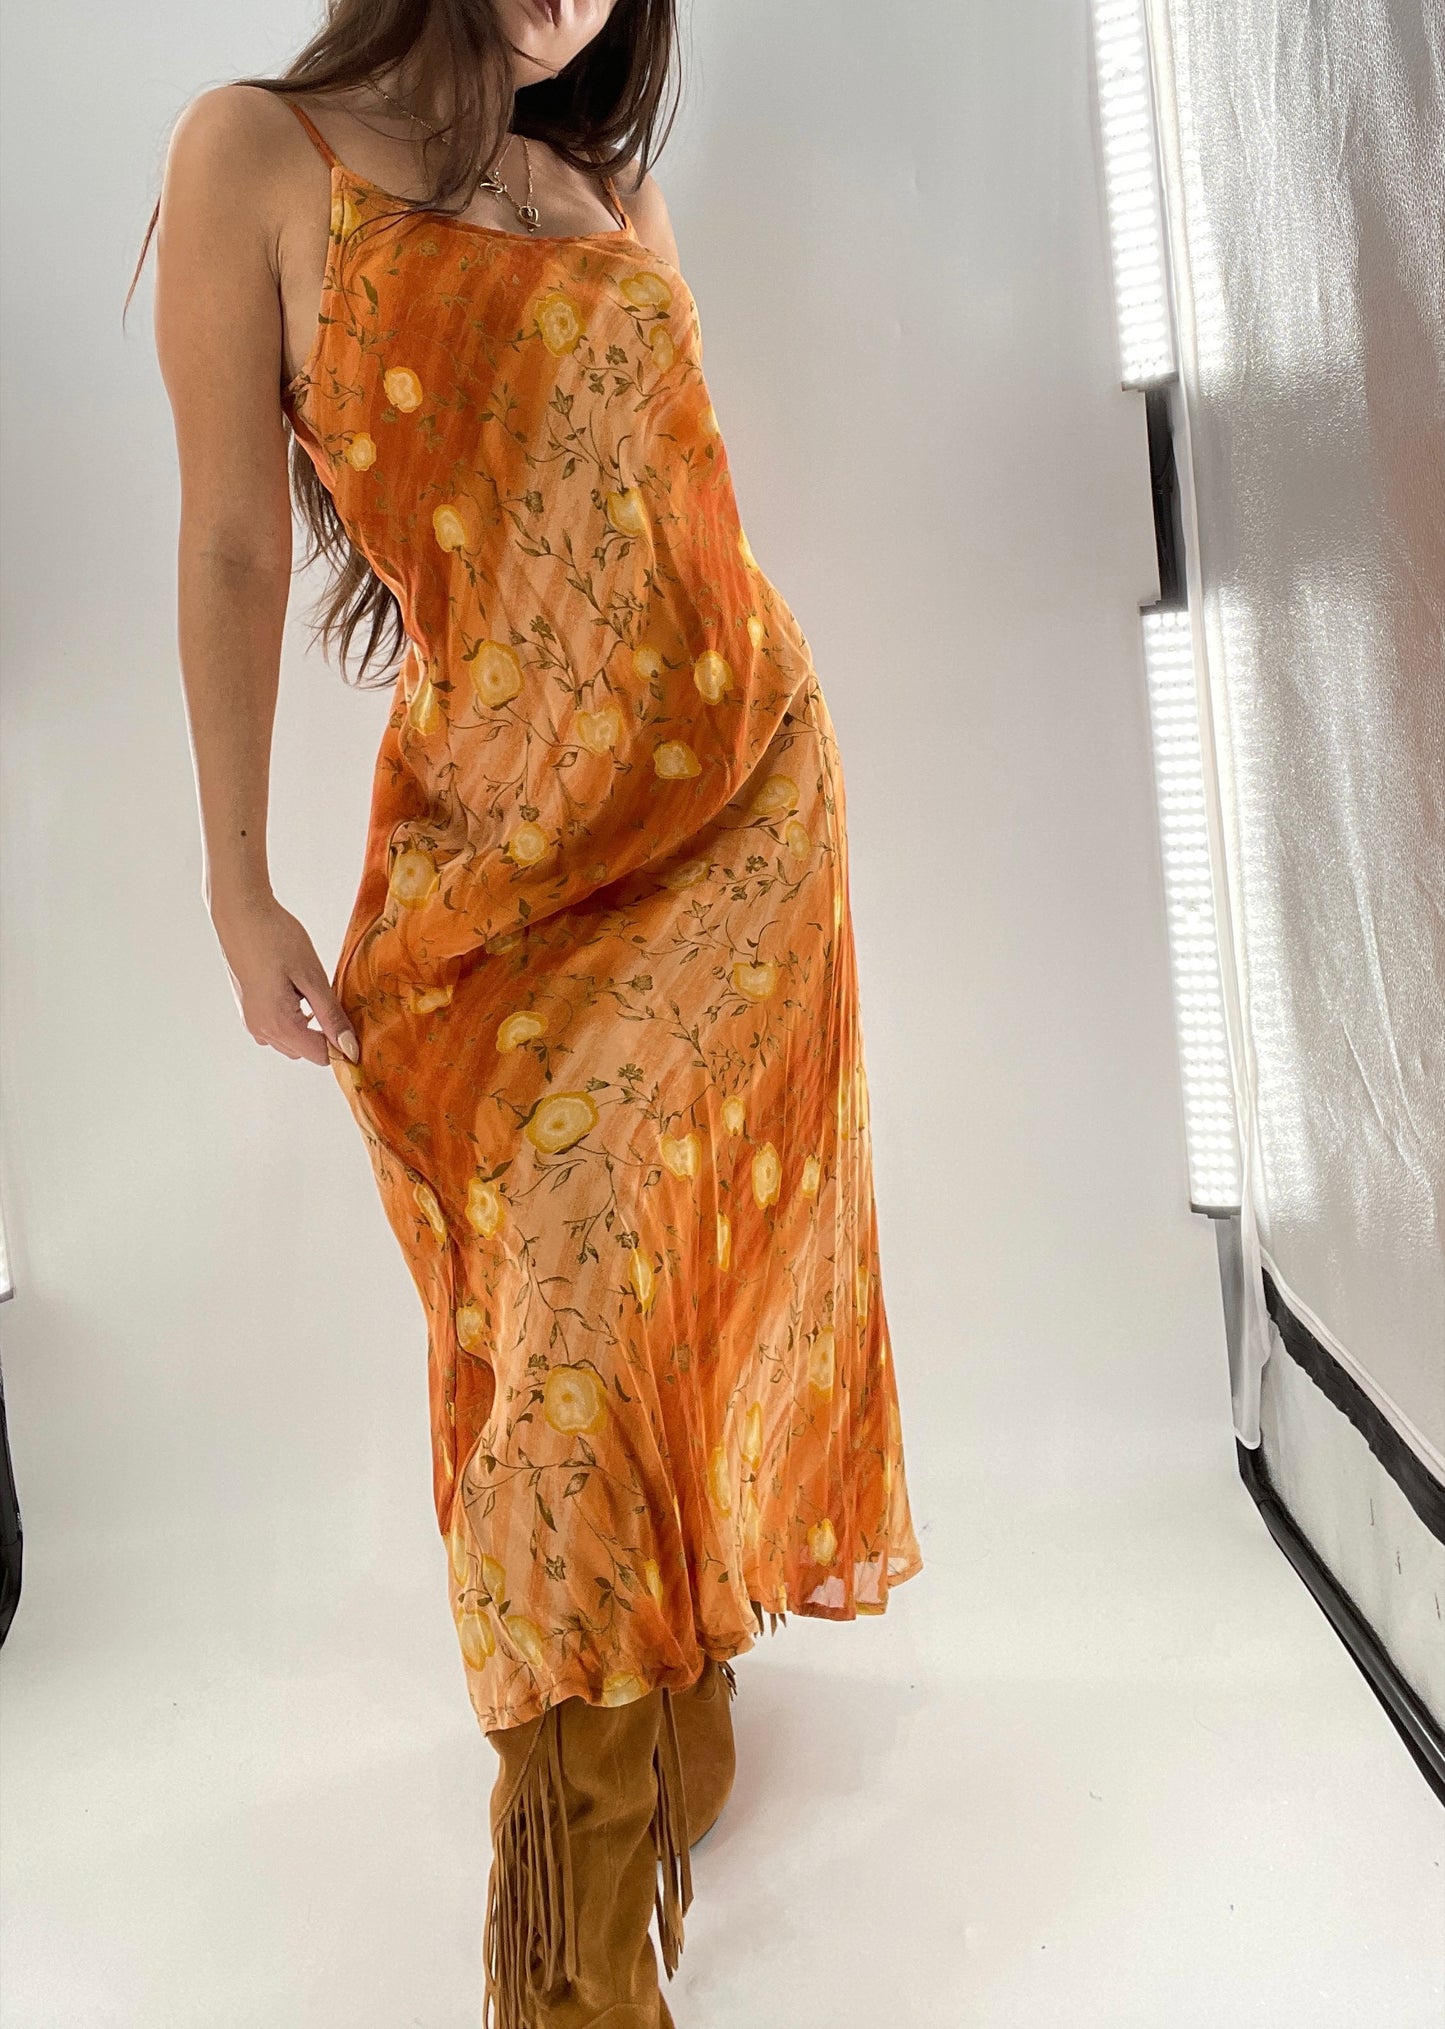 Deadstock Vintage 1990s Sacred Threads Midi Sunset Ombré Dress with Yellow Flowers  (M/L)